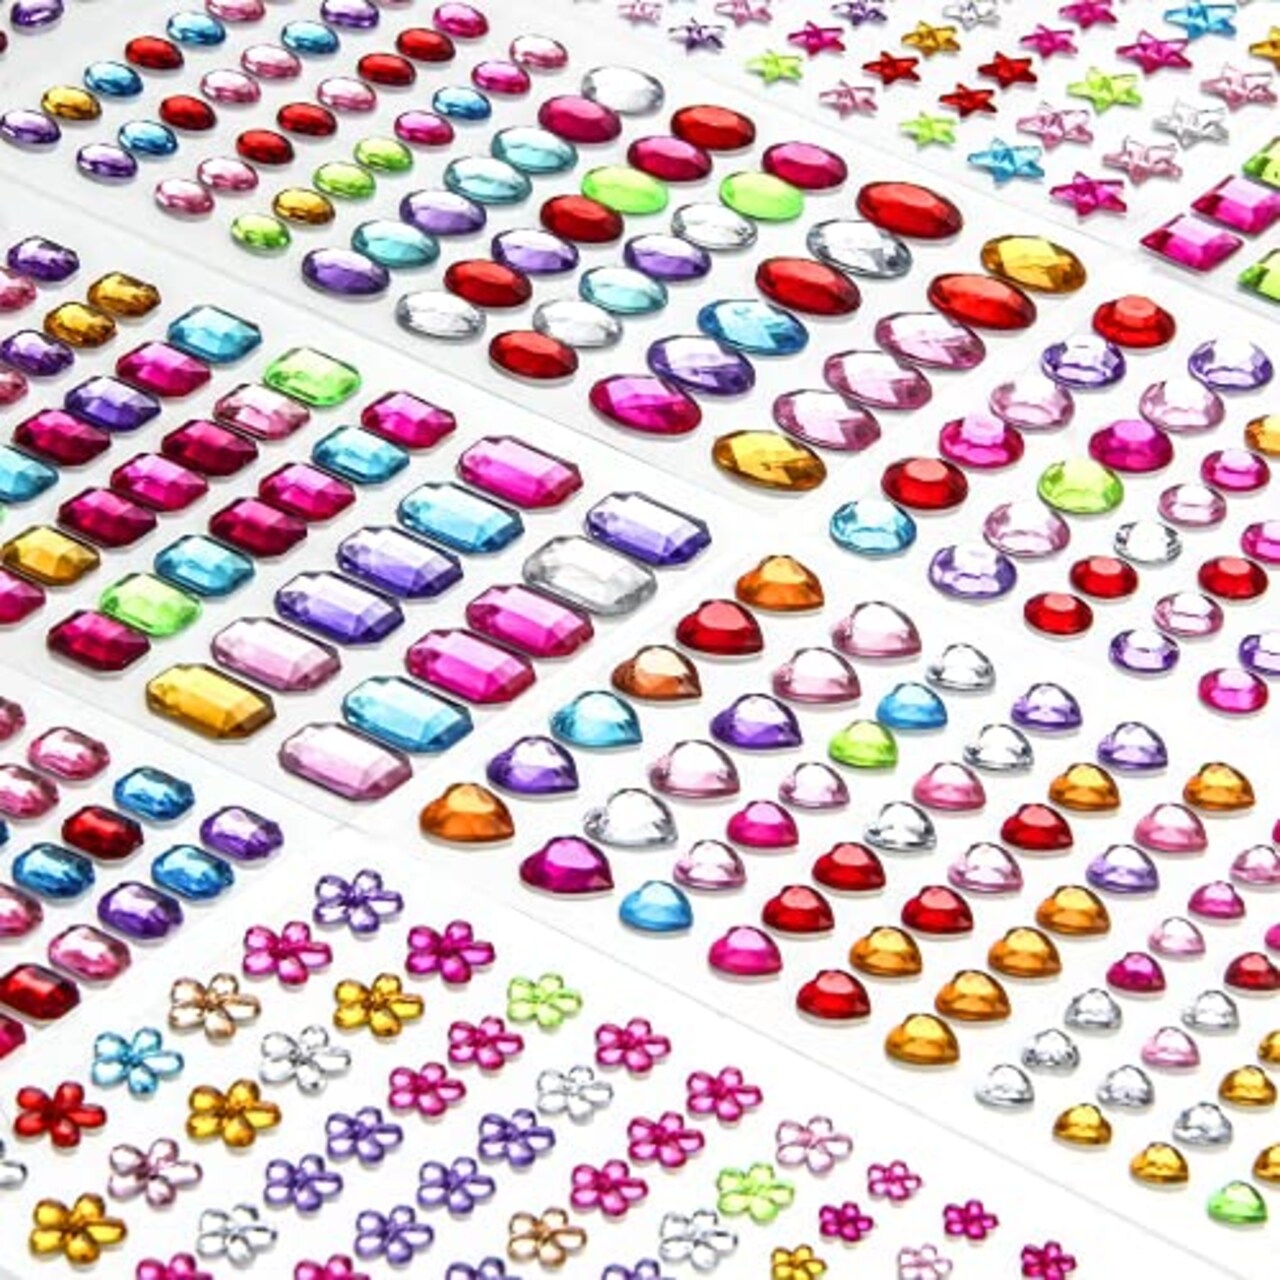 1200+ PCS Self Adhesive Gems Stickers,14 Sheets Rhinestone Stickers for DIY  Craft,8 Shapes Sparkle Jewels for Nail Body Makeup Festival